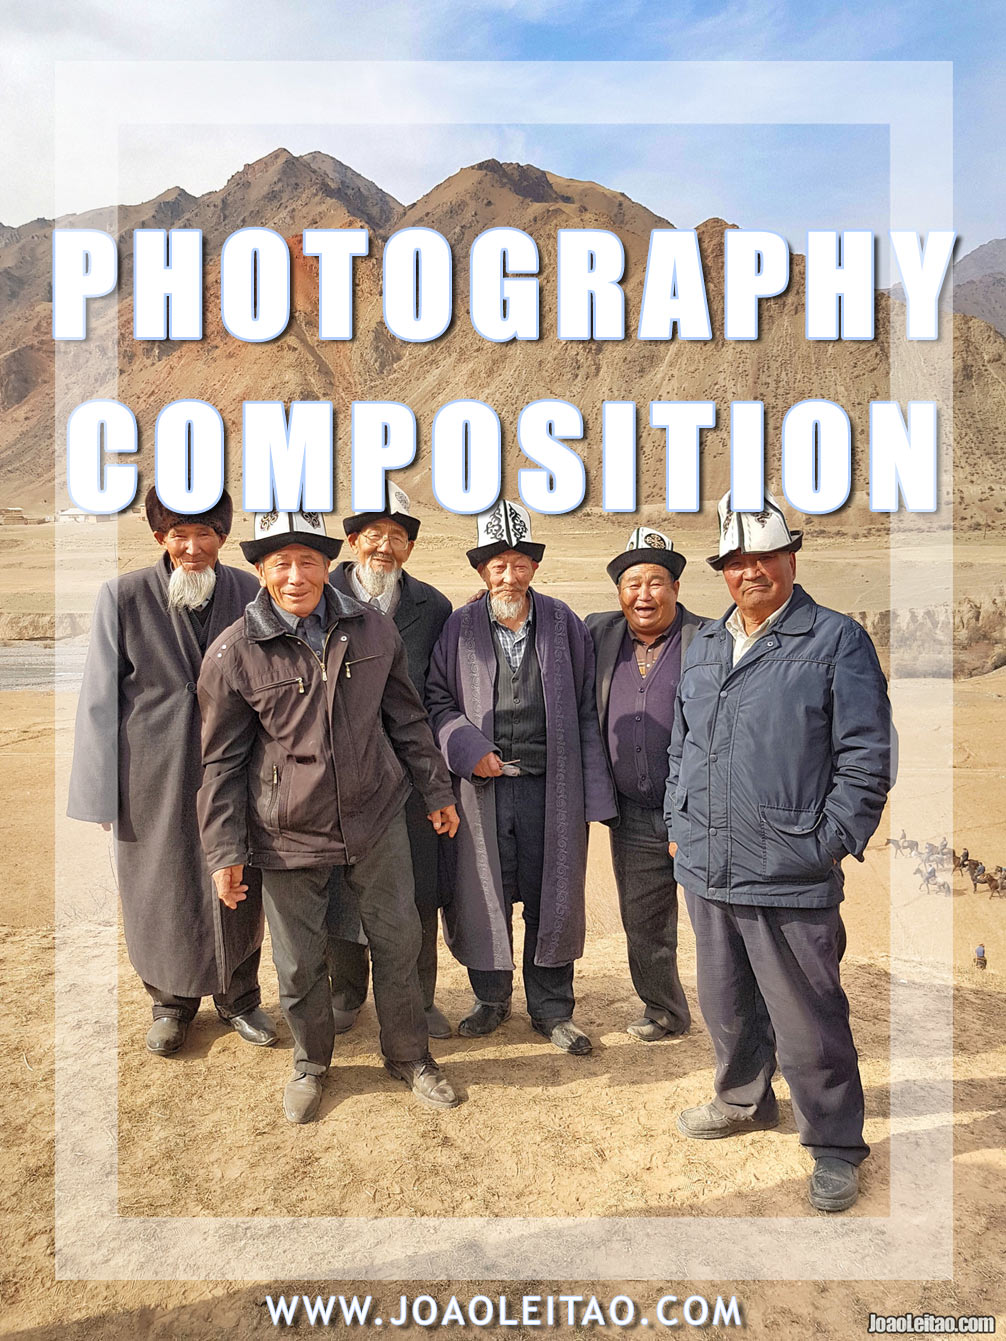 Composition in Photography